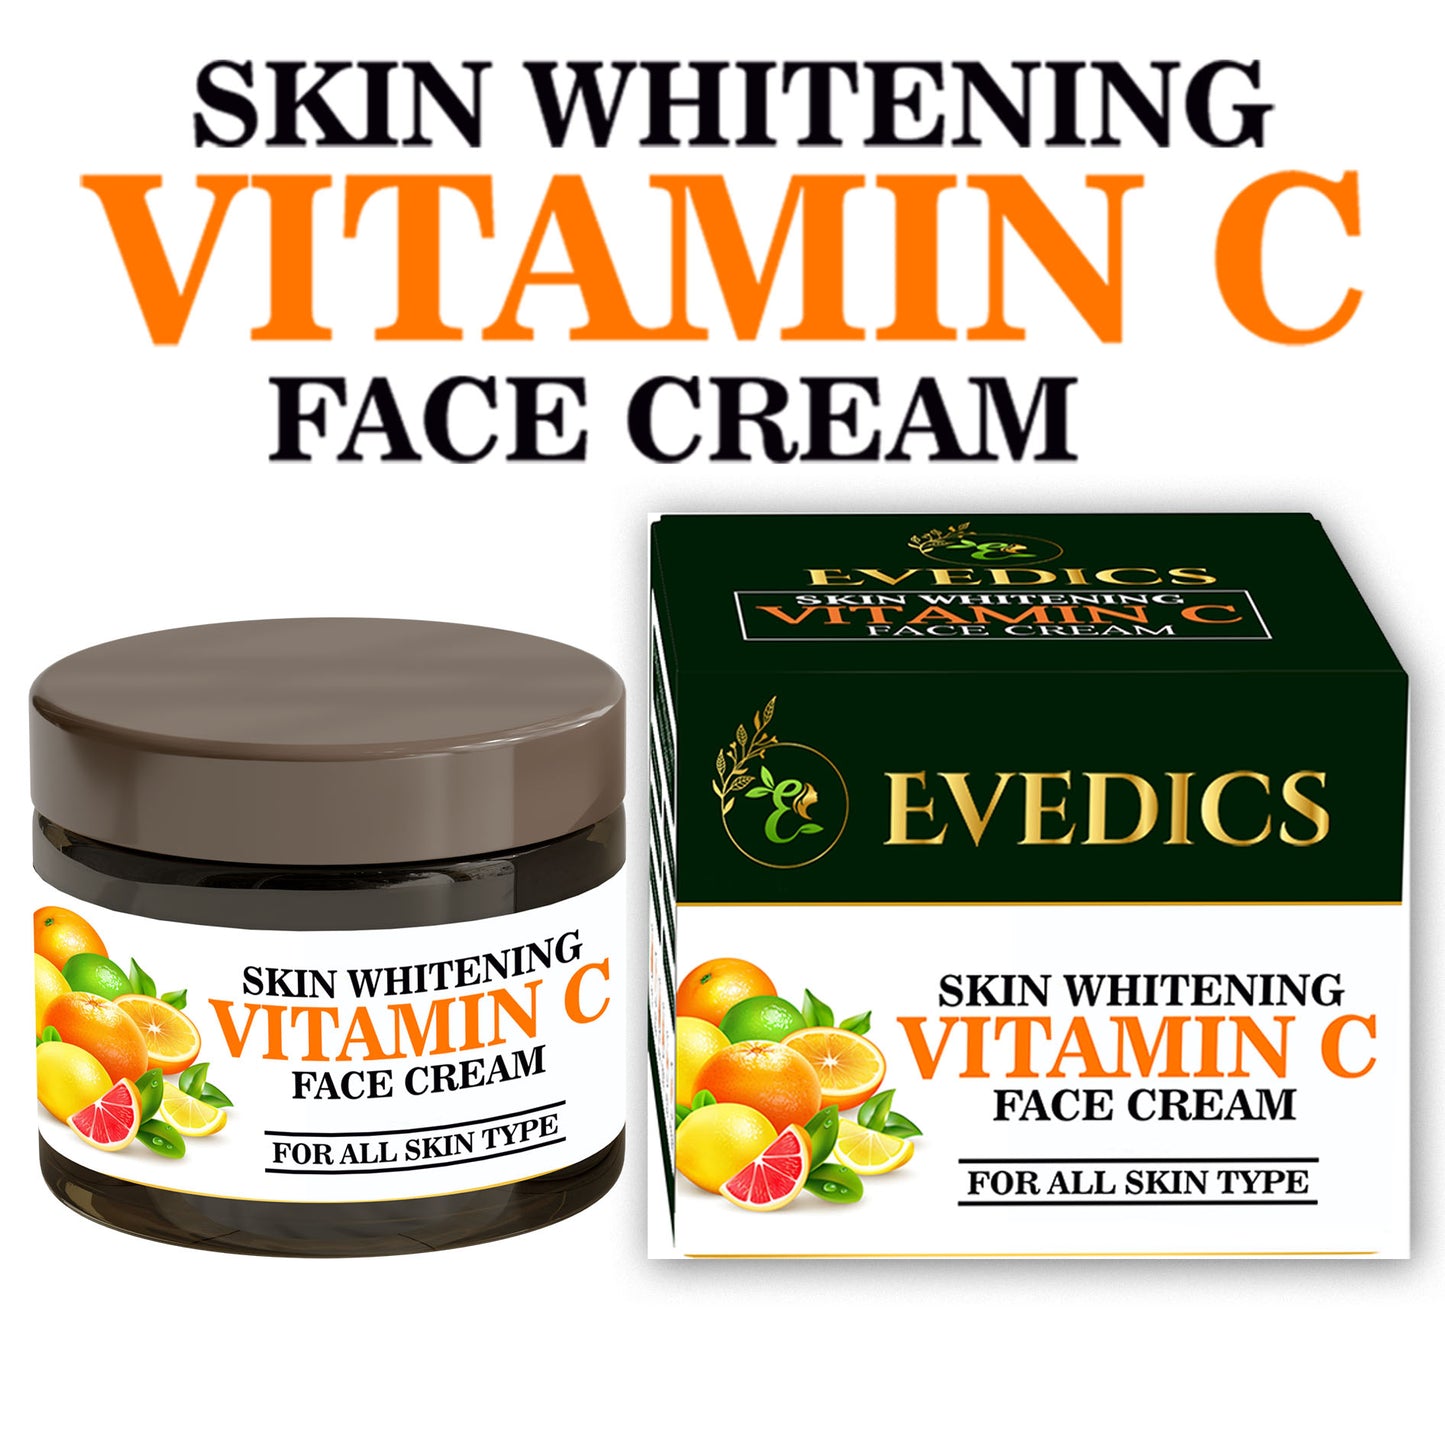 Evedics Vitamin C Correcting and Brightening Non Greasy Face Cream for All Skin Types ounger Looking Nourished & Bright Skin | SLS & Paraben Free.